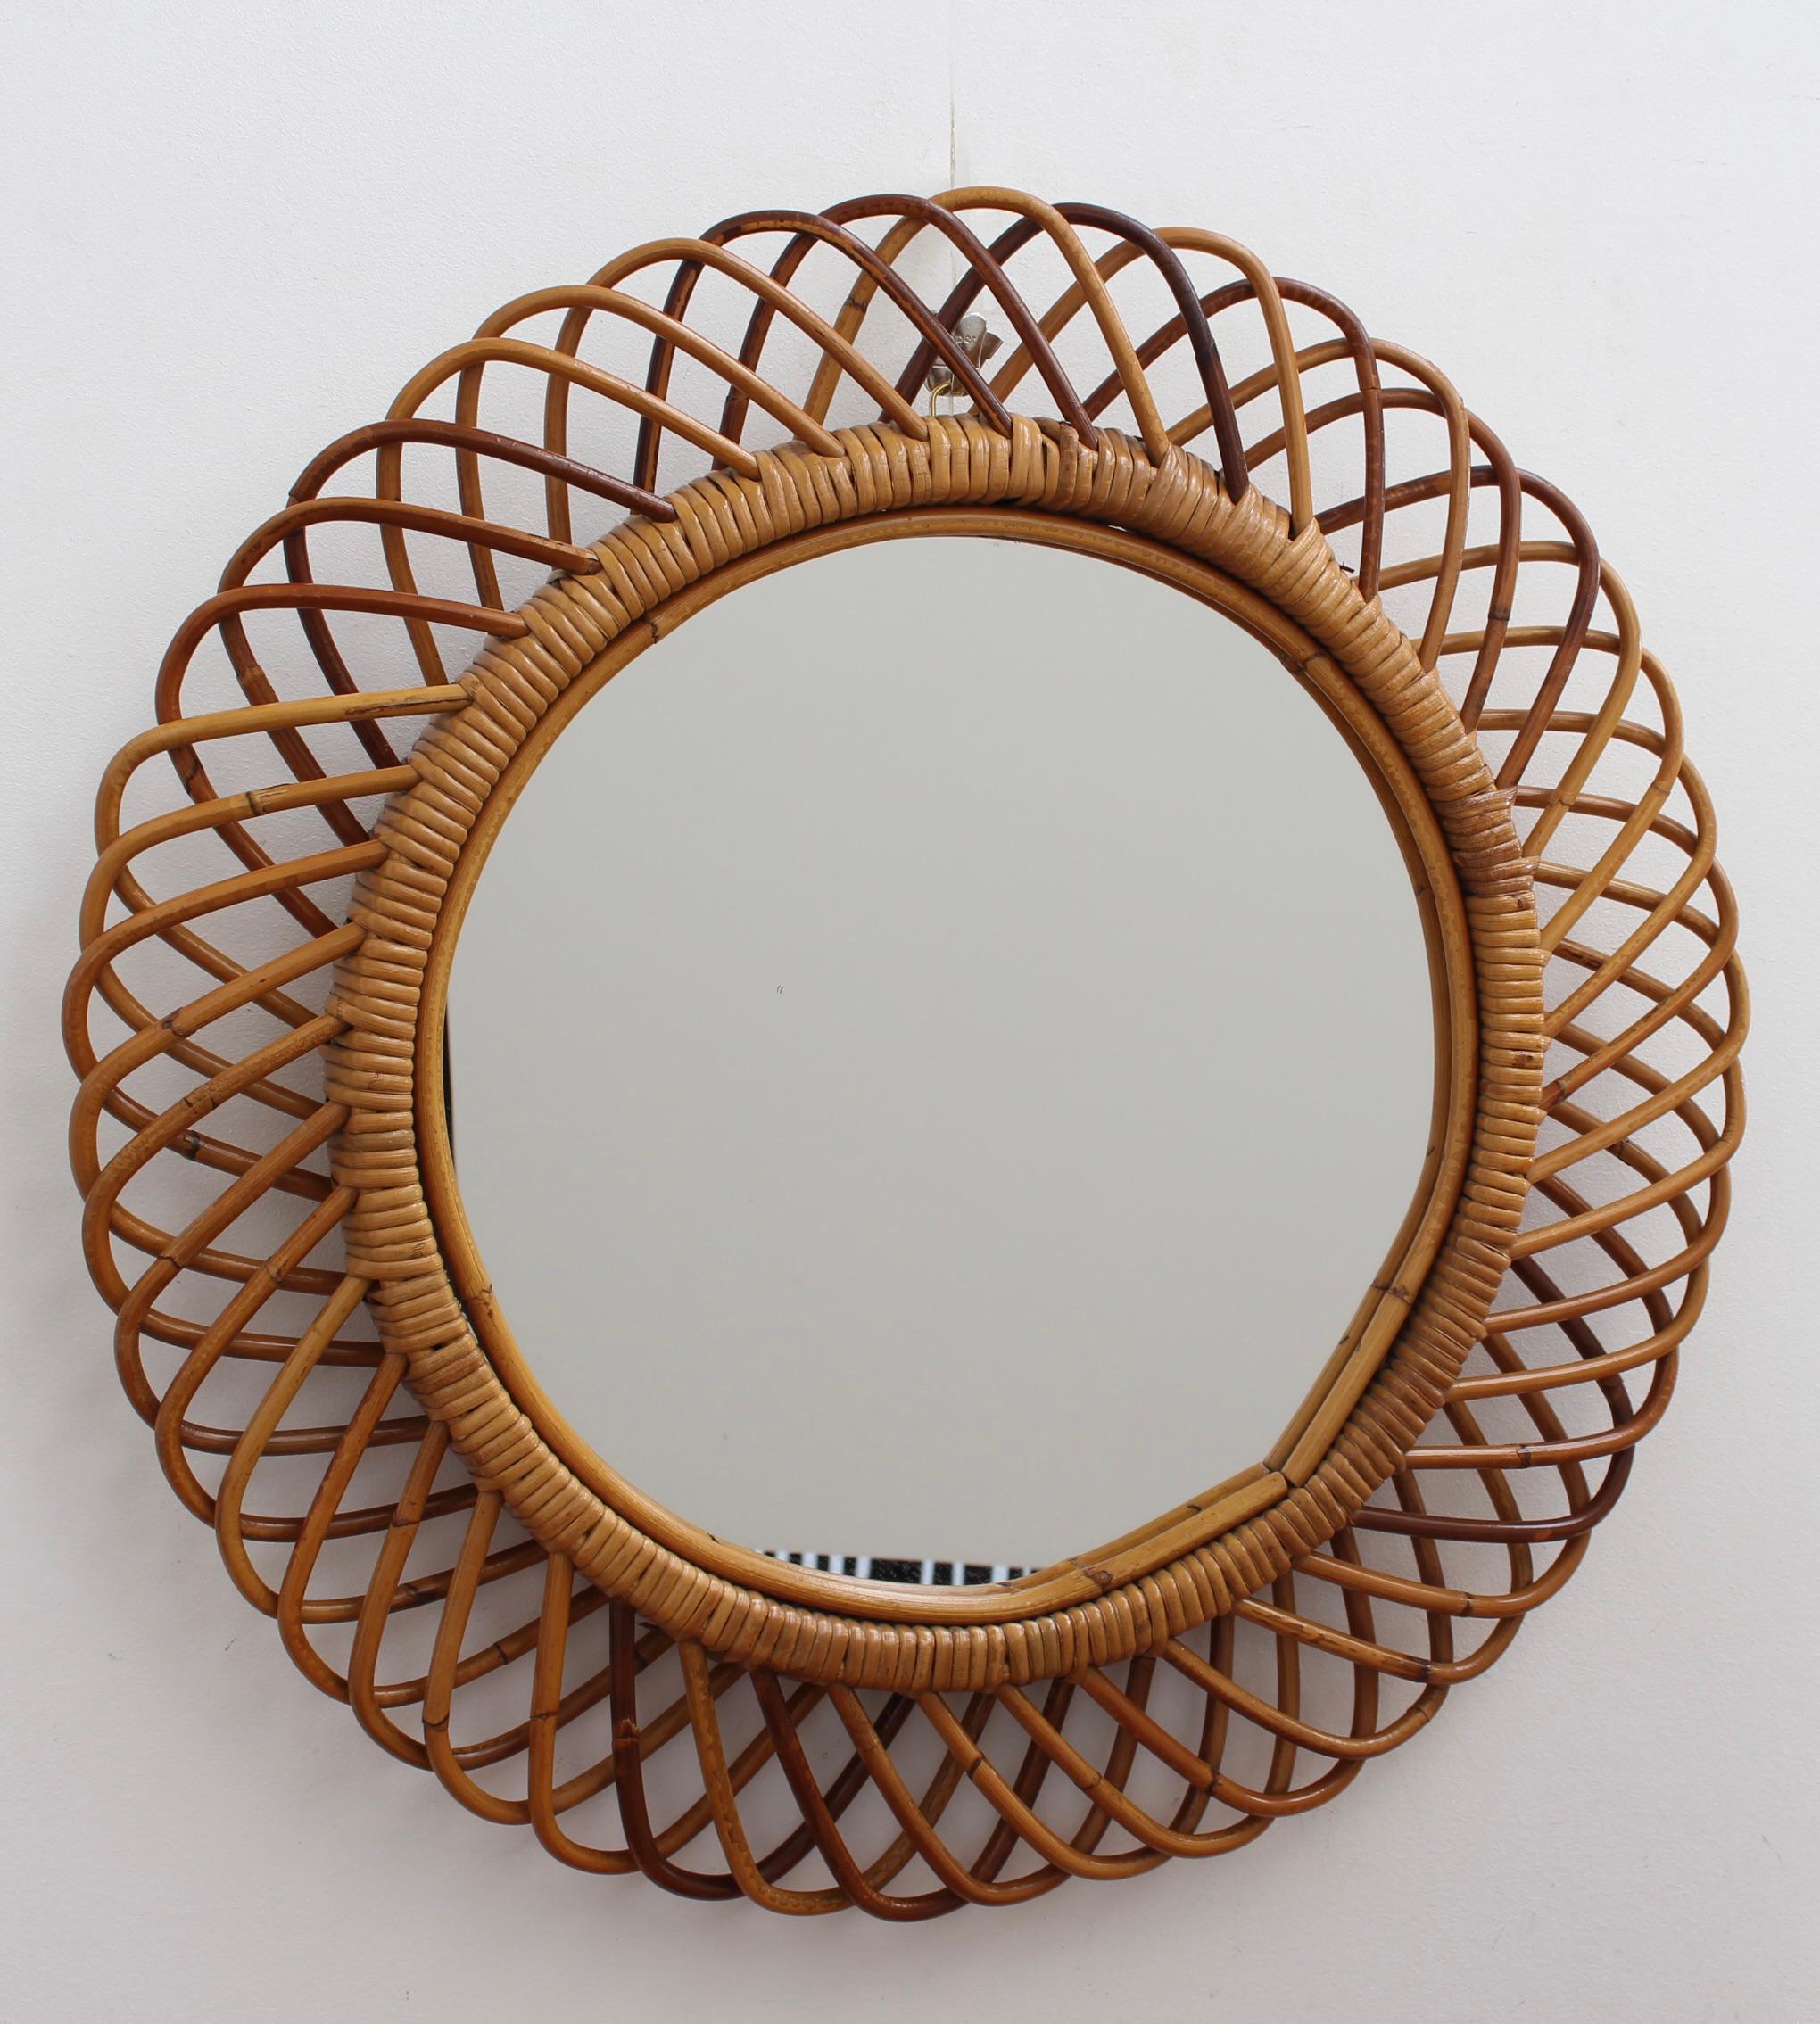 Italian rattan round wall mirror (circa 1960s) in the style of Franco Albini. This is a delightful vintage mirror with substantial depth and a complex weave of rattan. There is a beautiful patina on the rattan and it is in good overall condition.